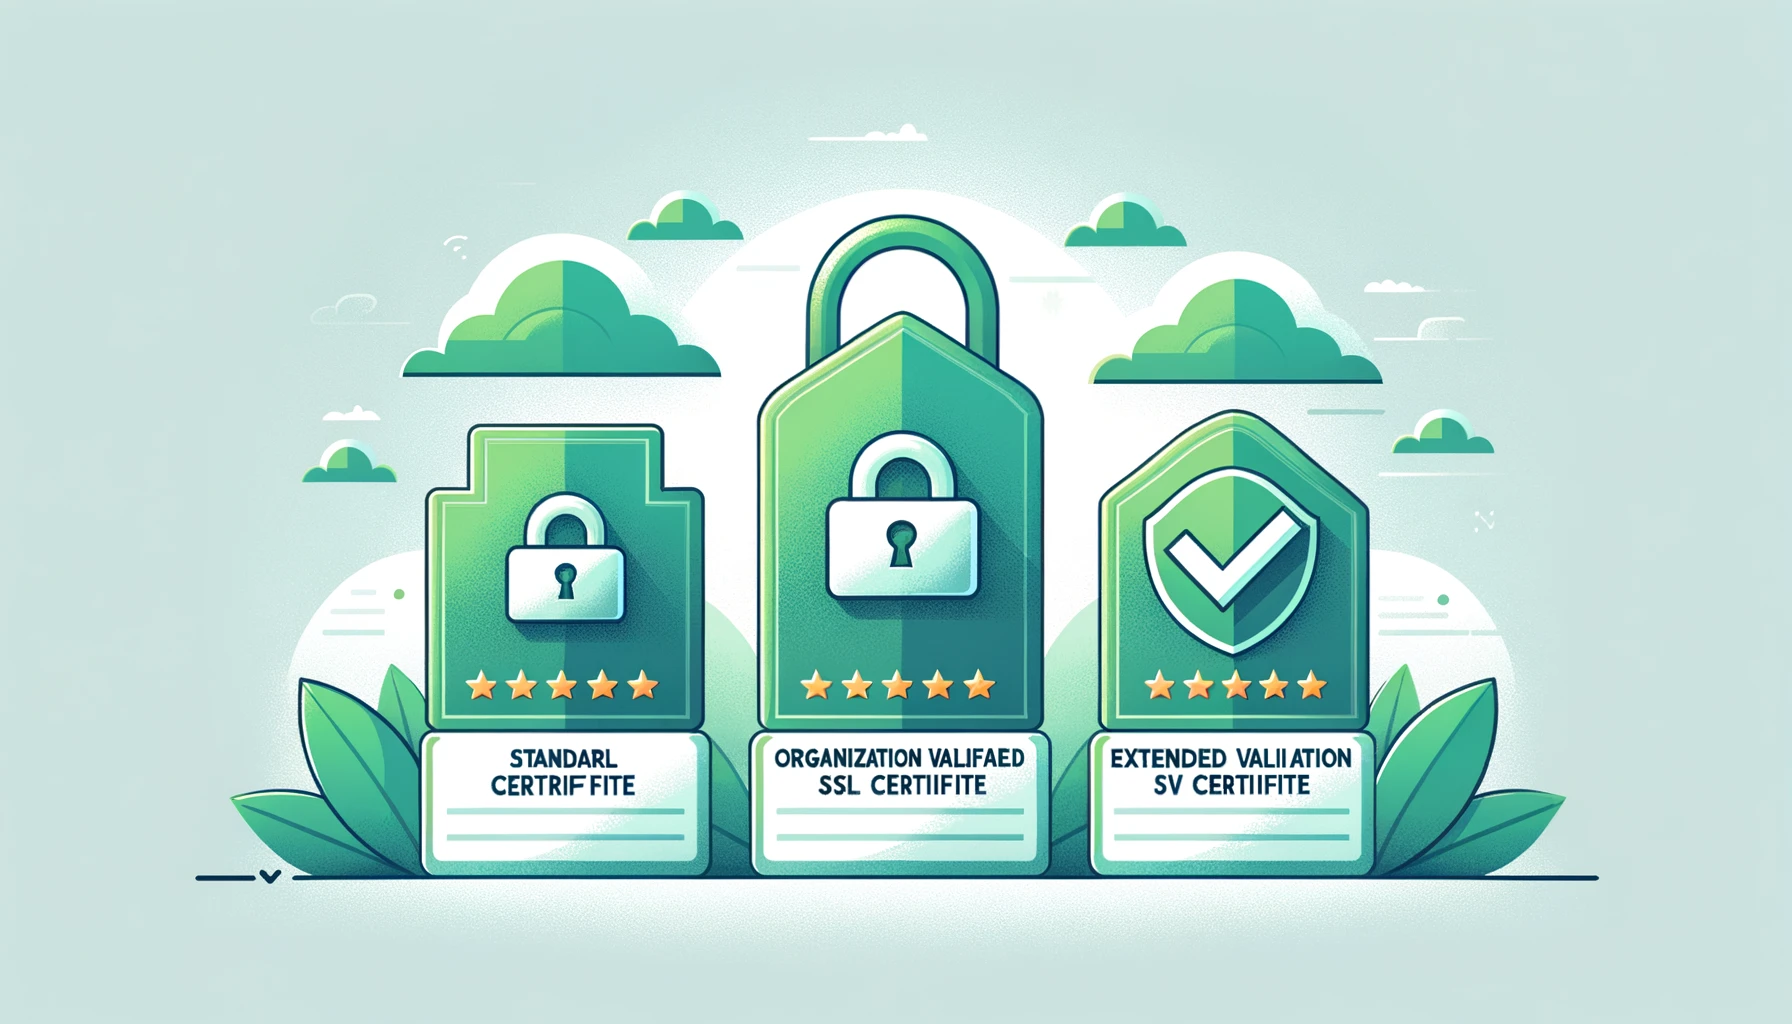 What are the different types of SSL certificate?
